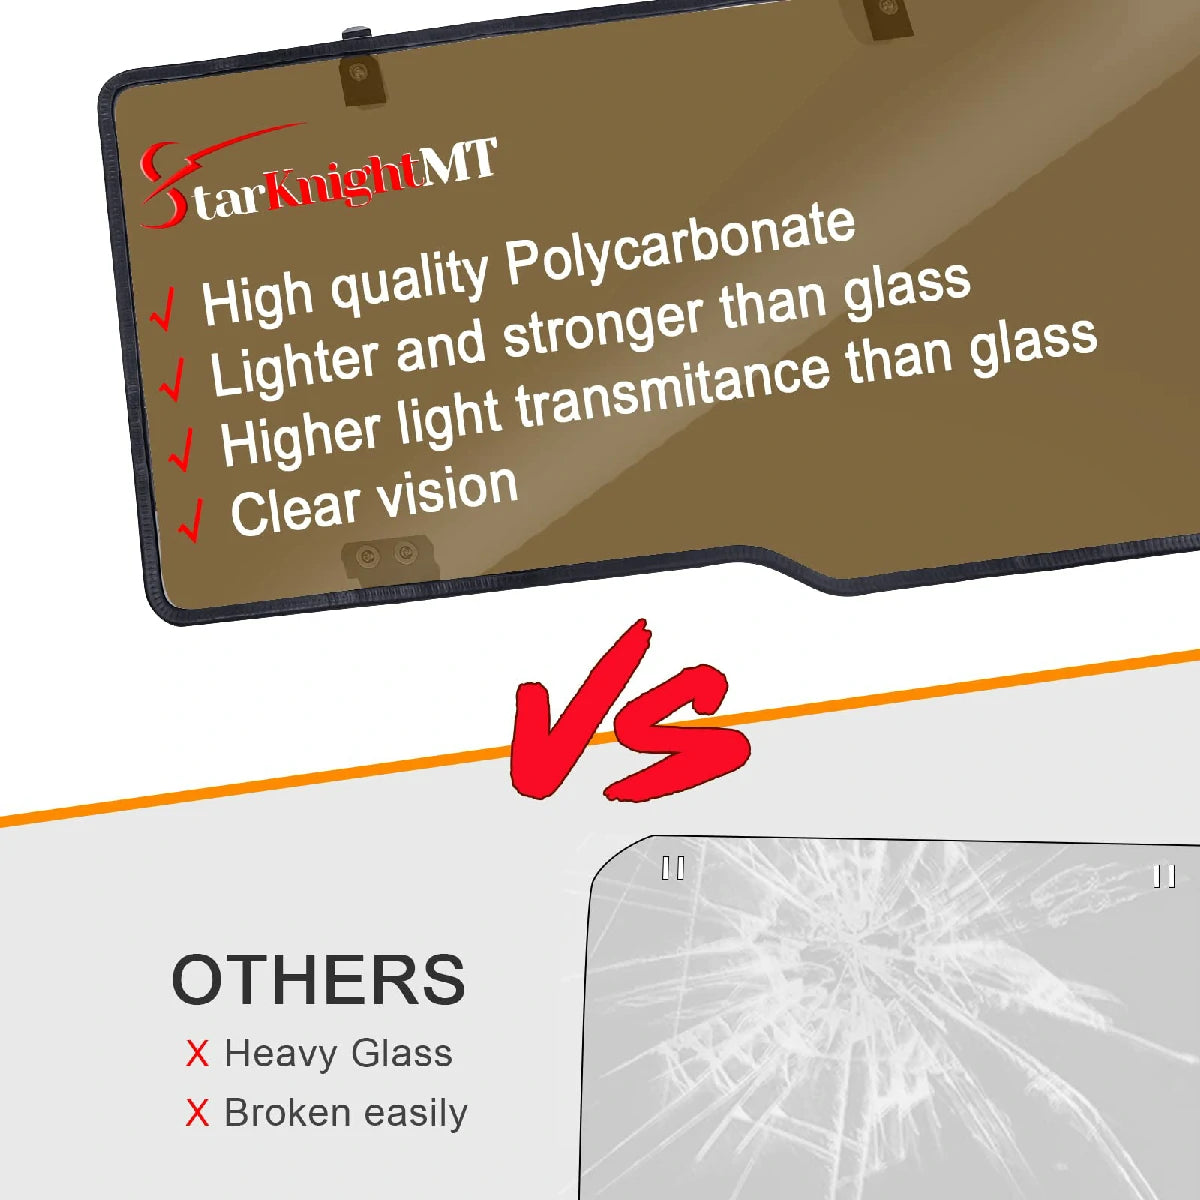 starknightmt windshield features vs others